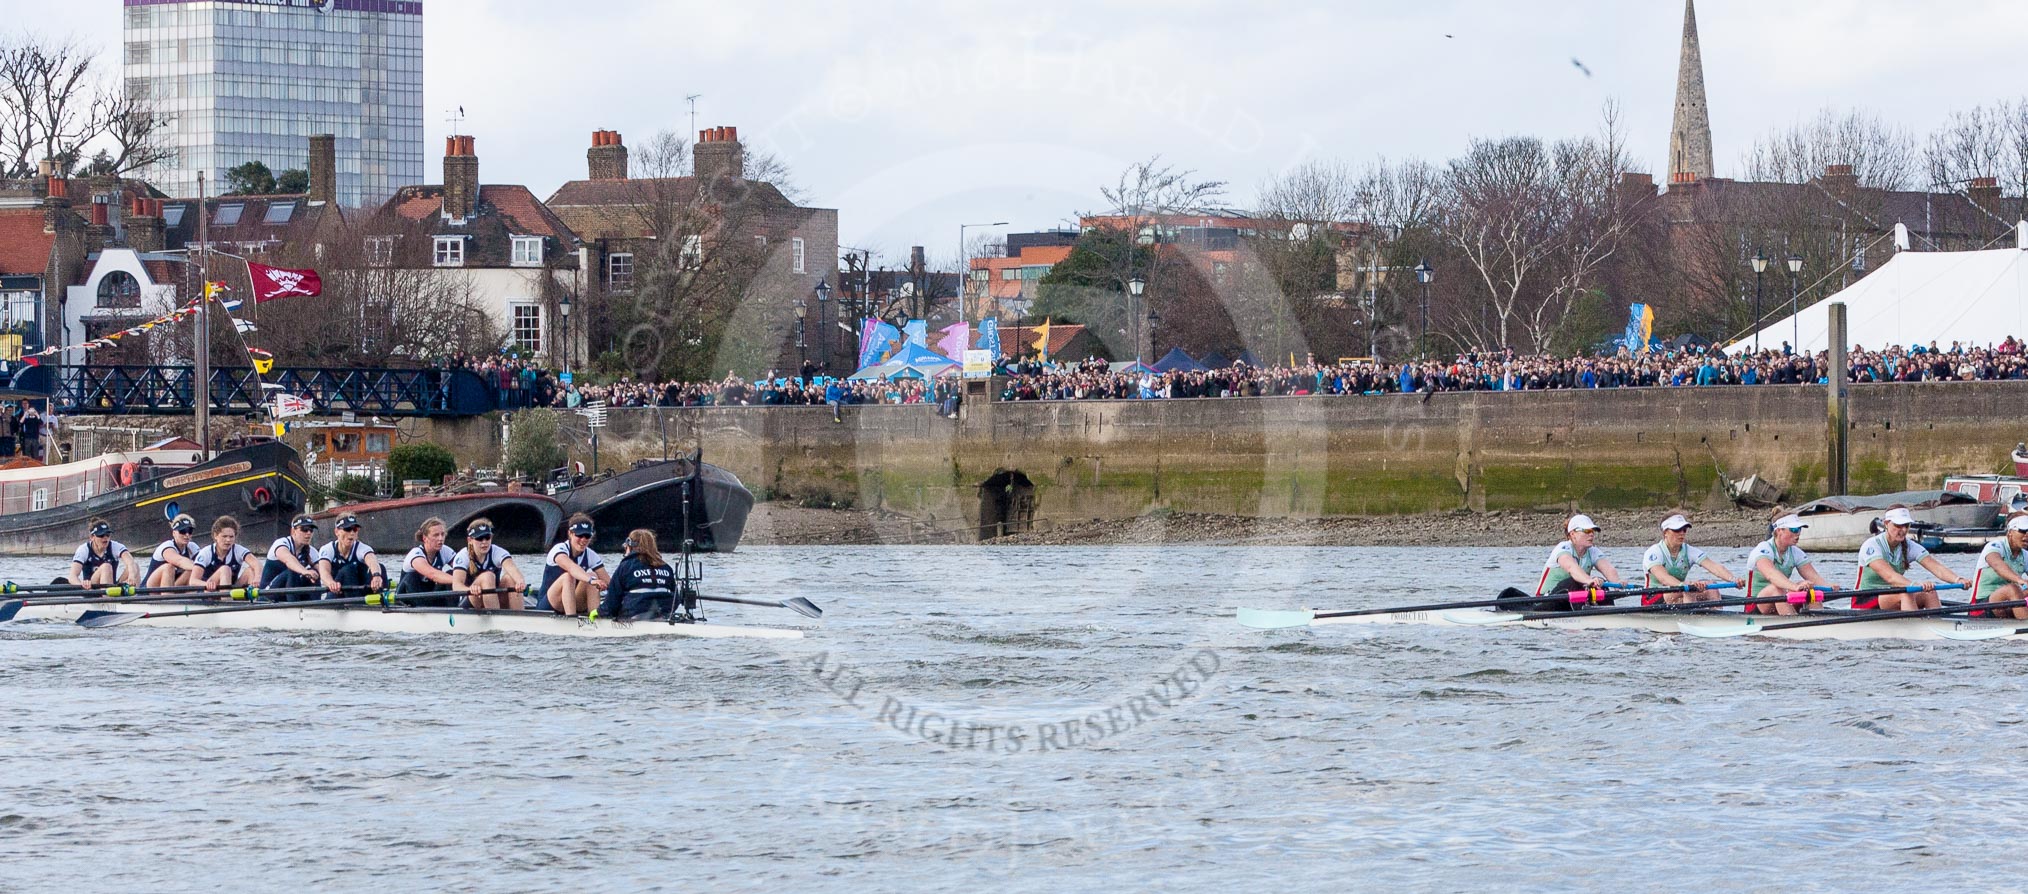 The Boat Race season 2016 -  The Cancer Research Women's Boat Race.
River Thames between Putney Bridge and Mortlake,
London SW15,

United Kingdom,
on 27 March 2016 at 14:18, image #231